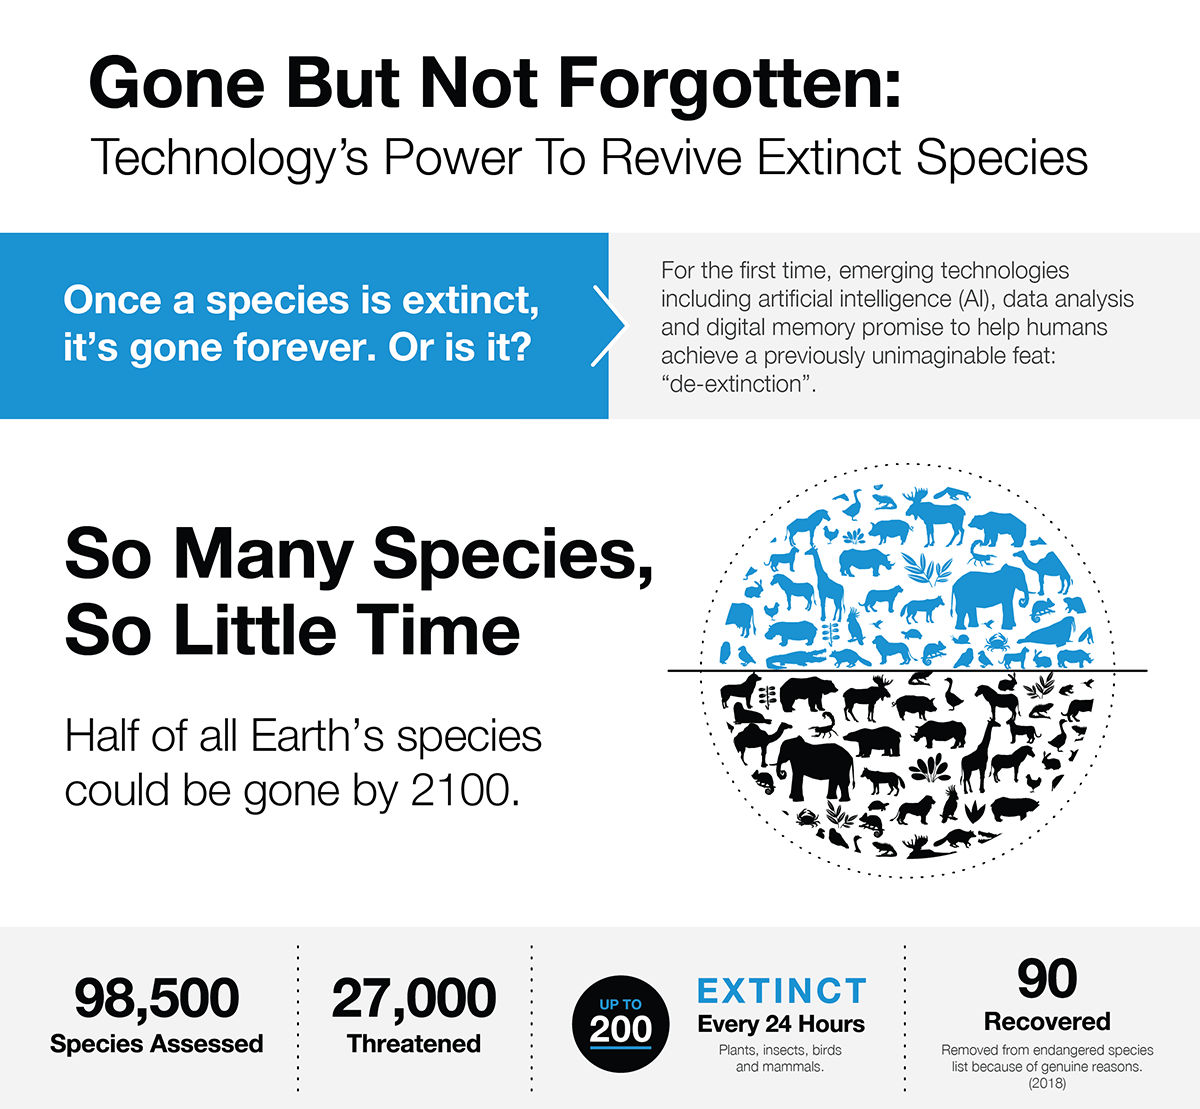 Infographic highlighting number of species assessed, threatened, extinct every 24 hours, and recovered